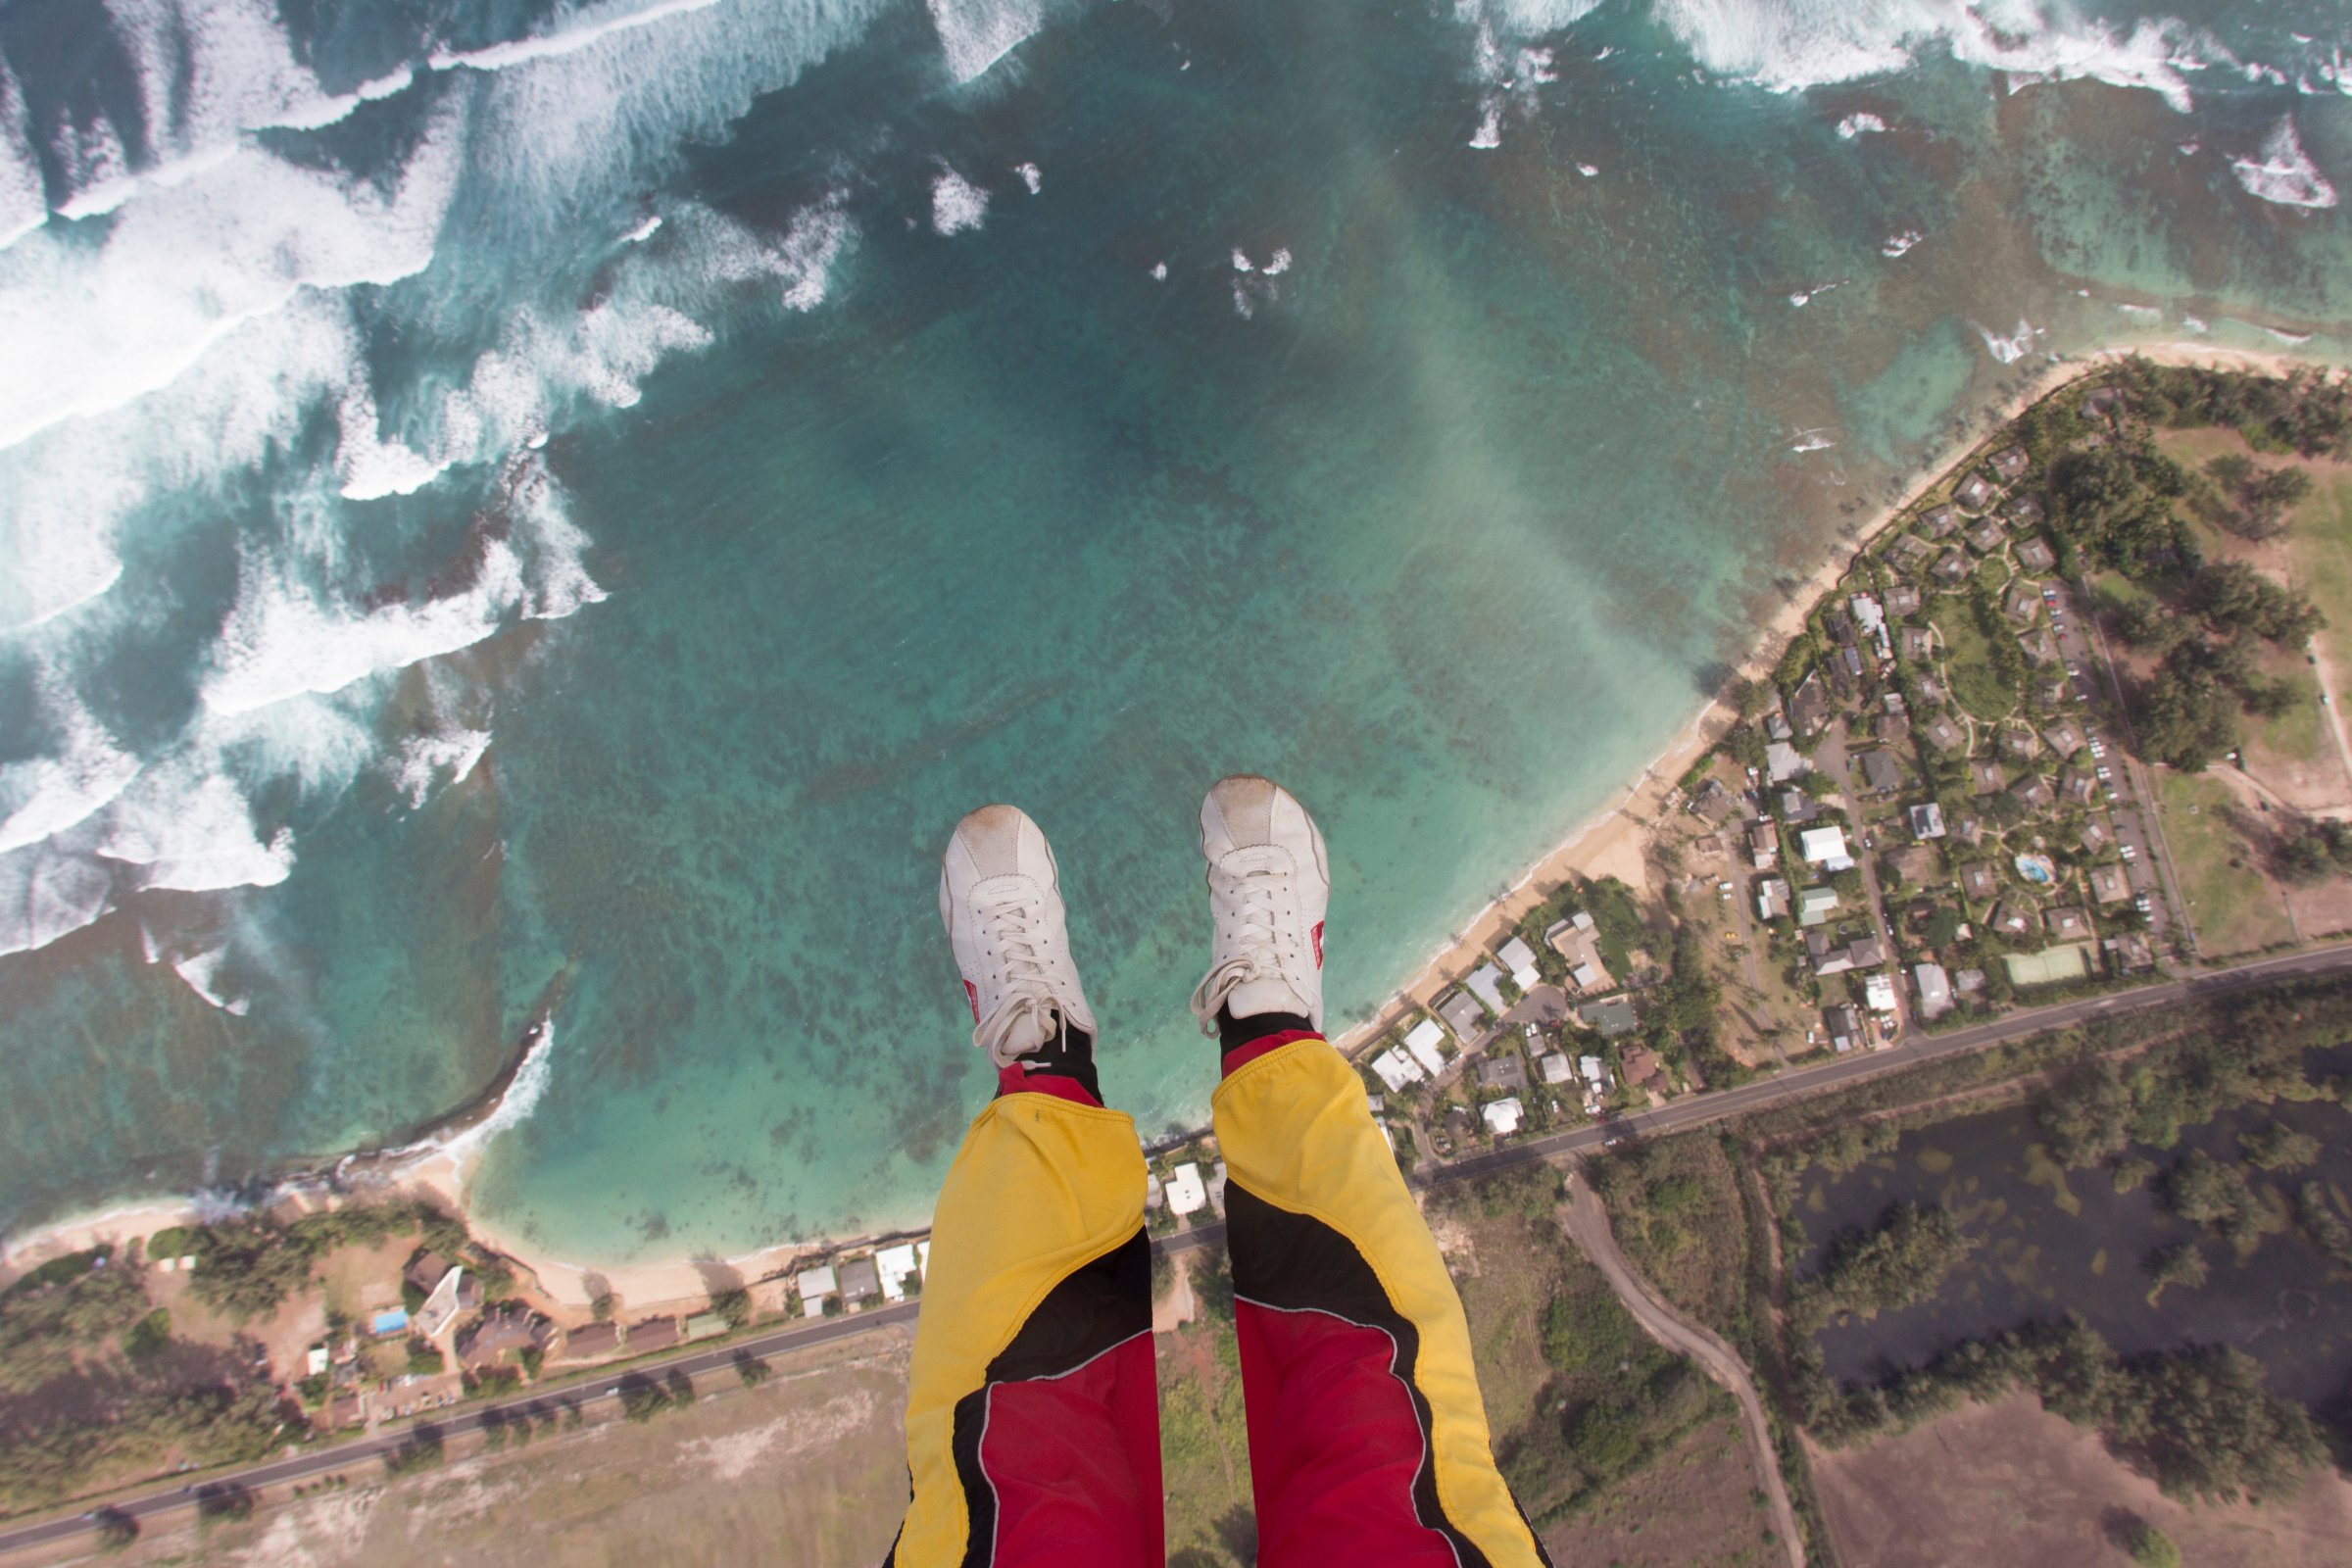 Legs and feet of skydiver above coastline